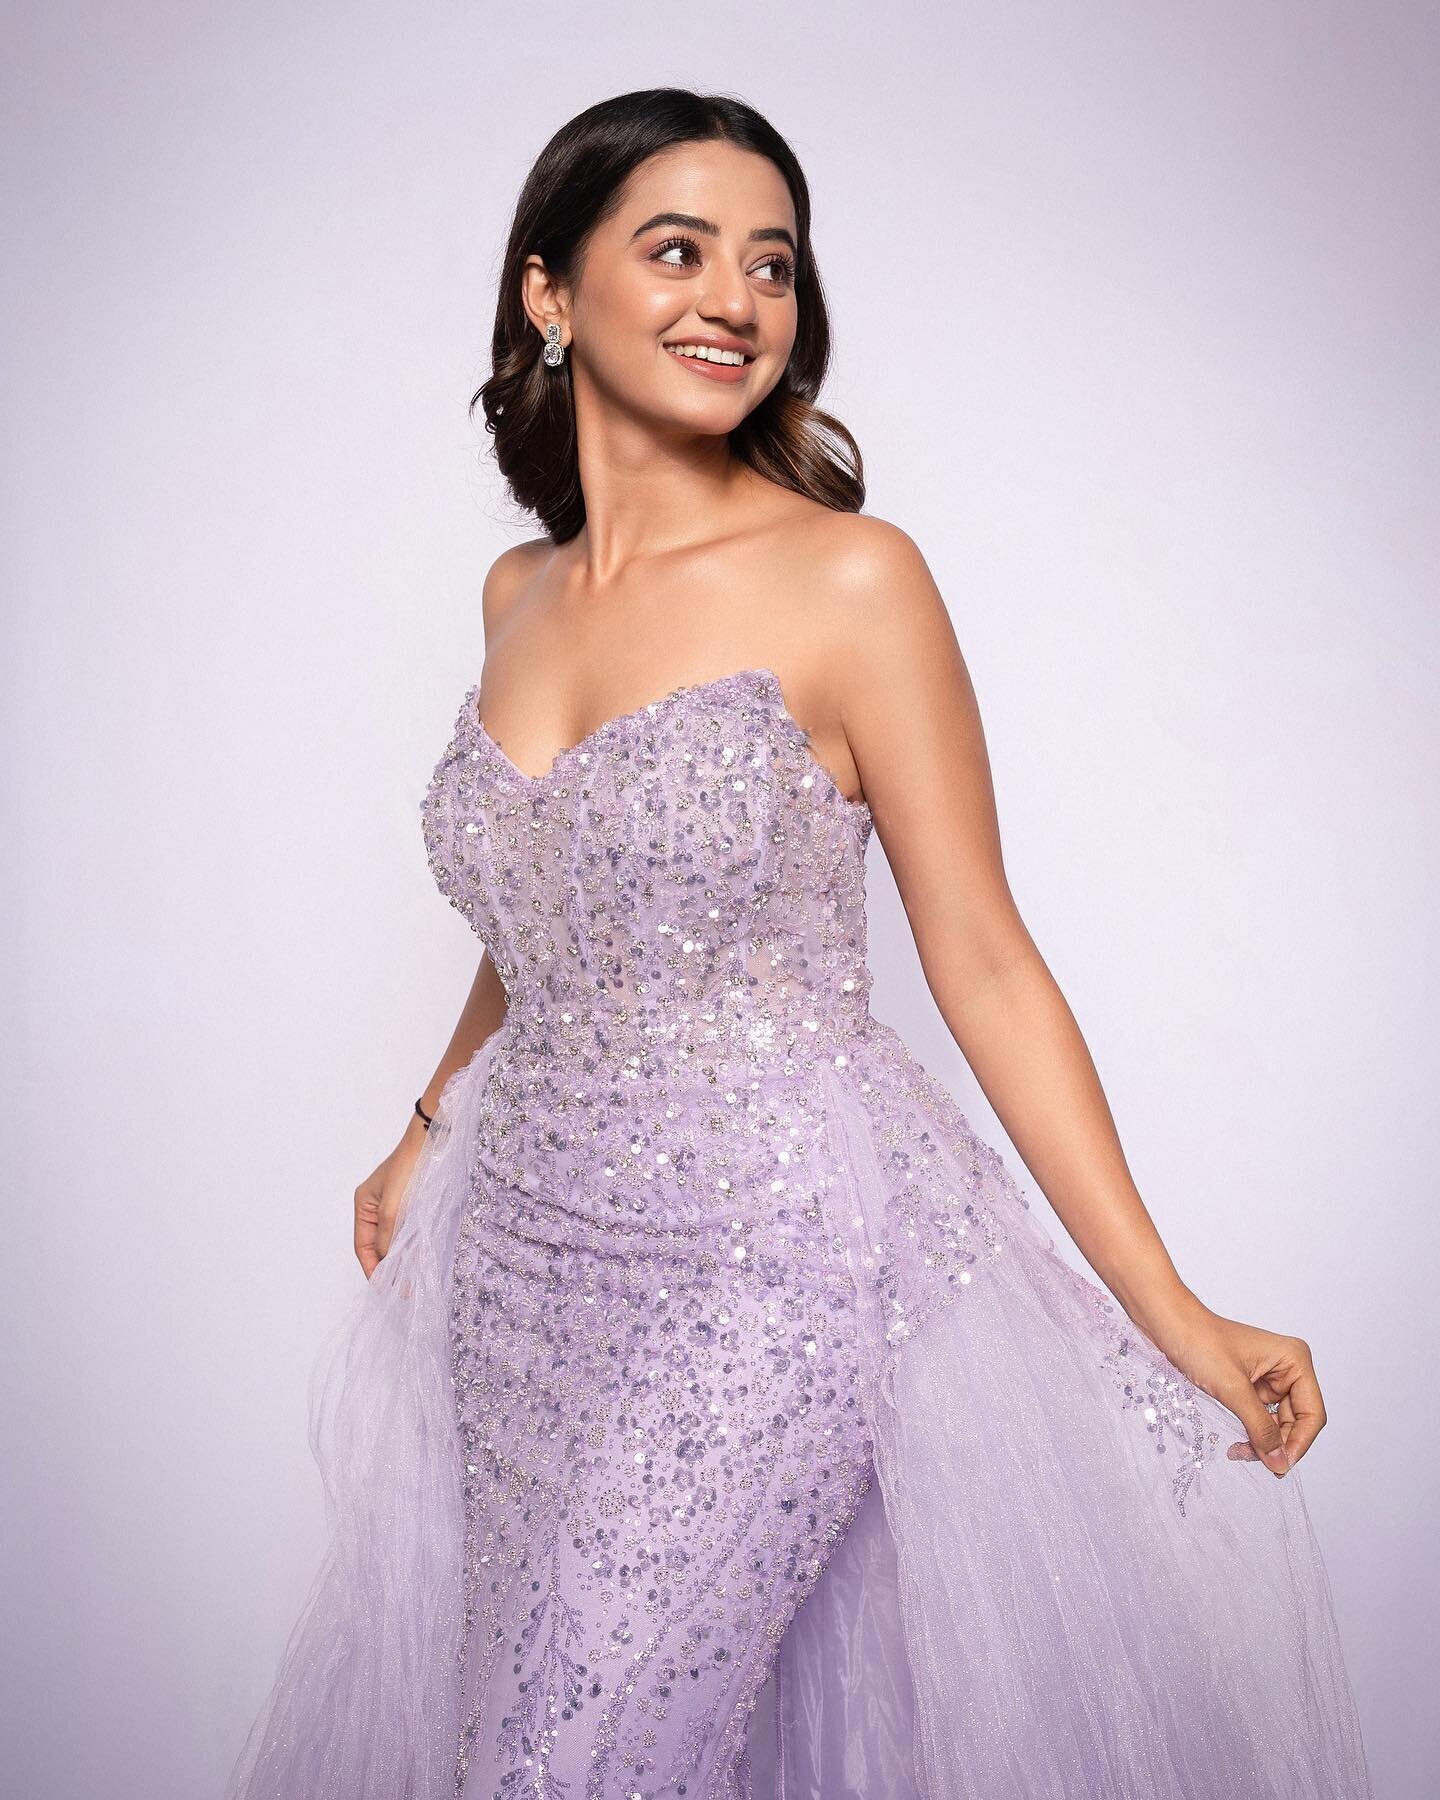 Helly Shah Latest Photos | Picture 1908432